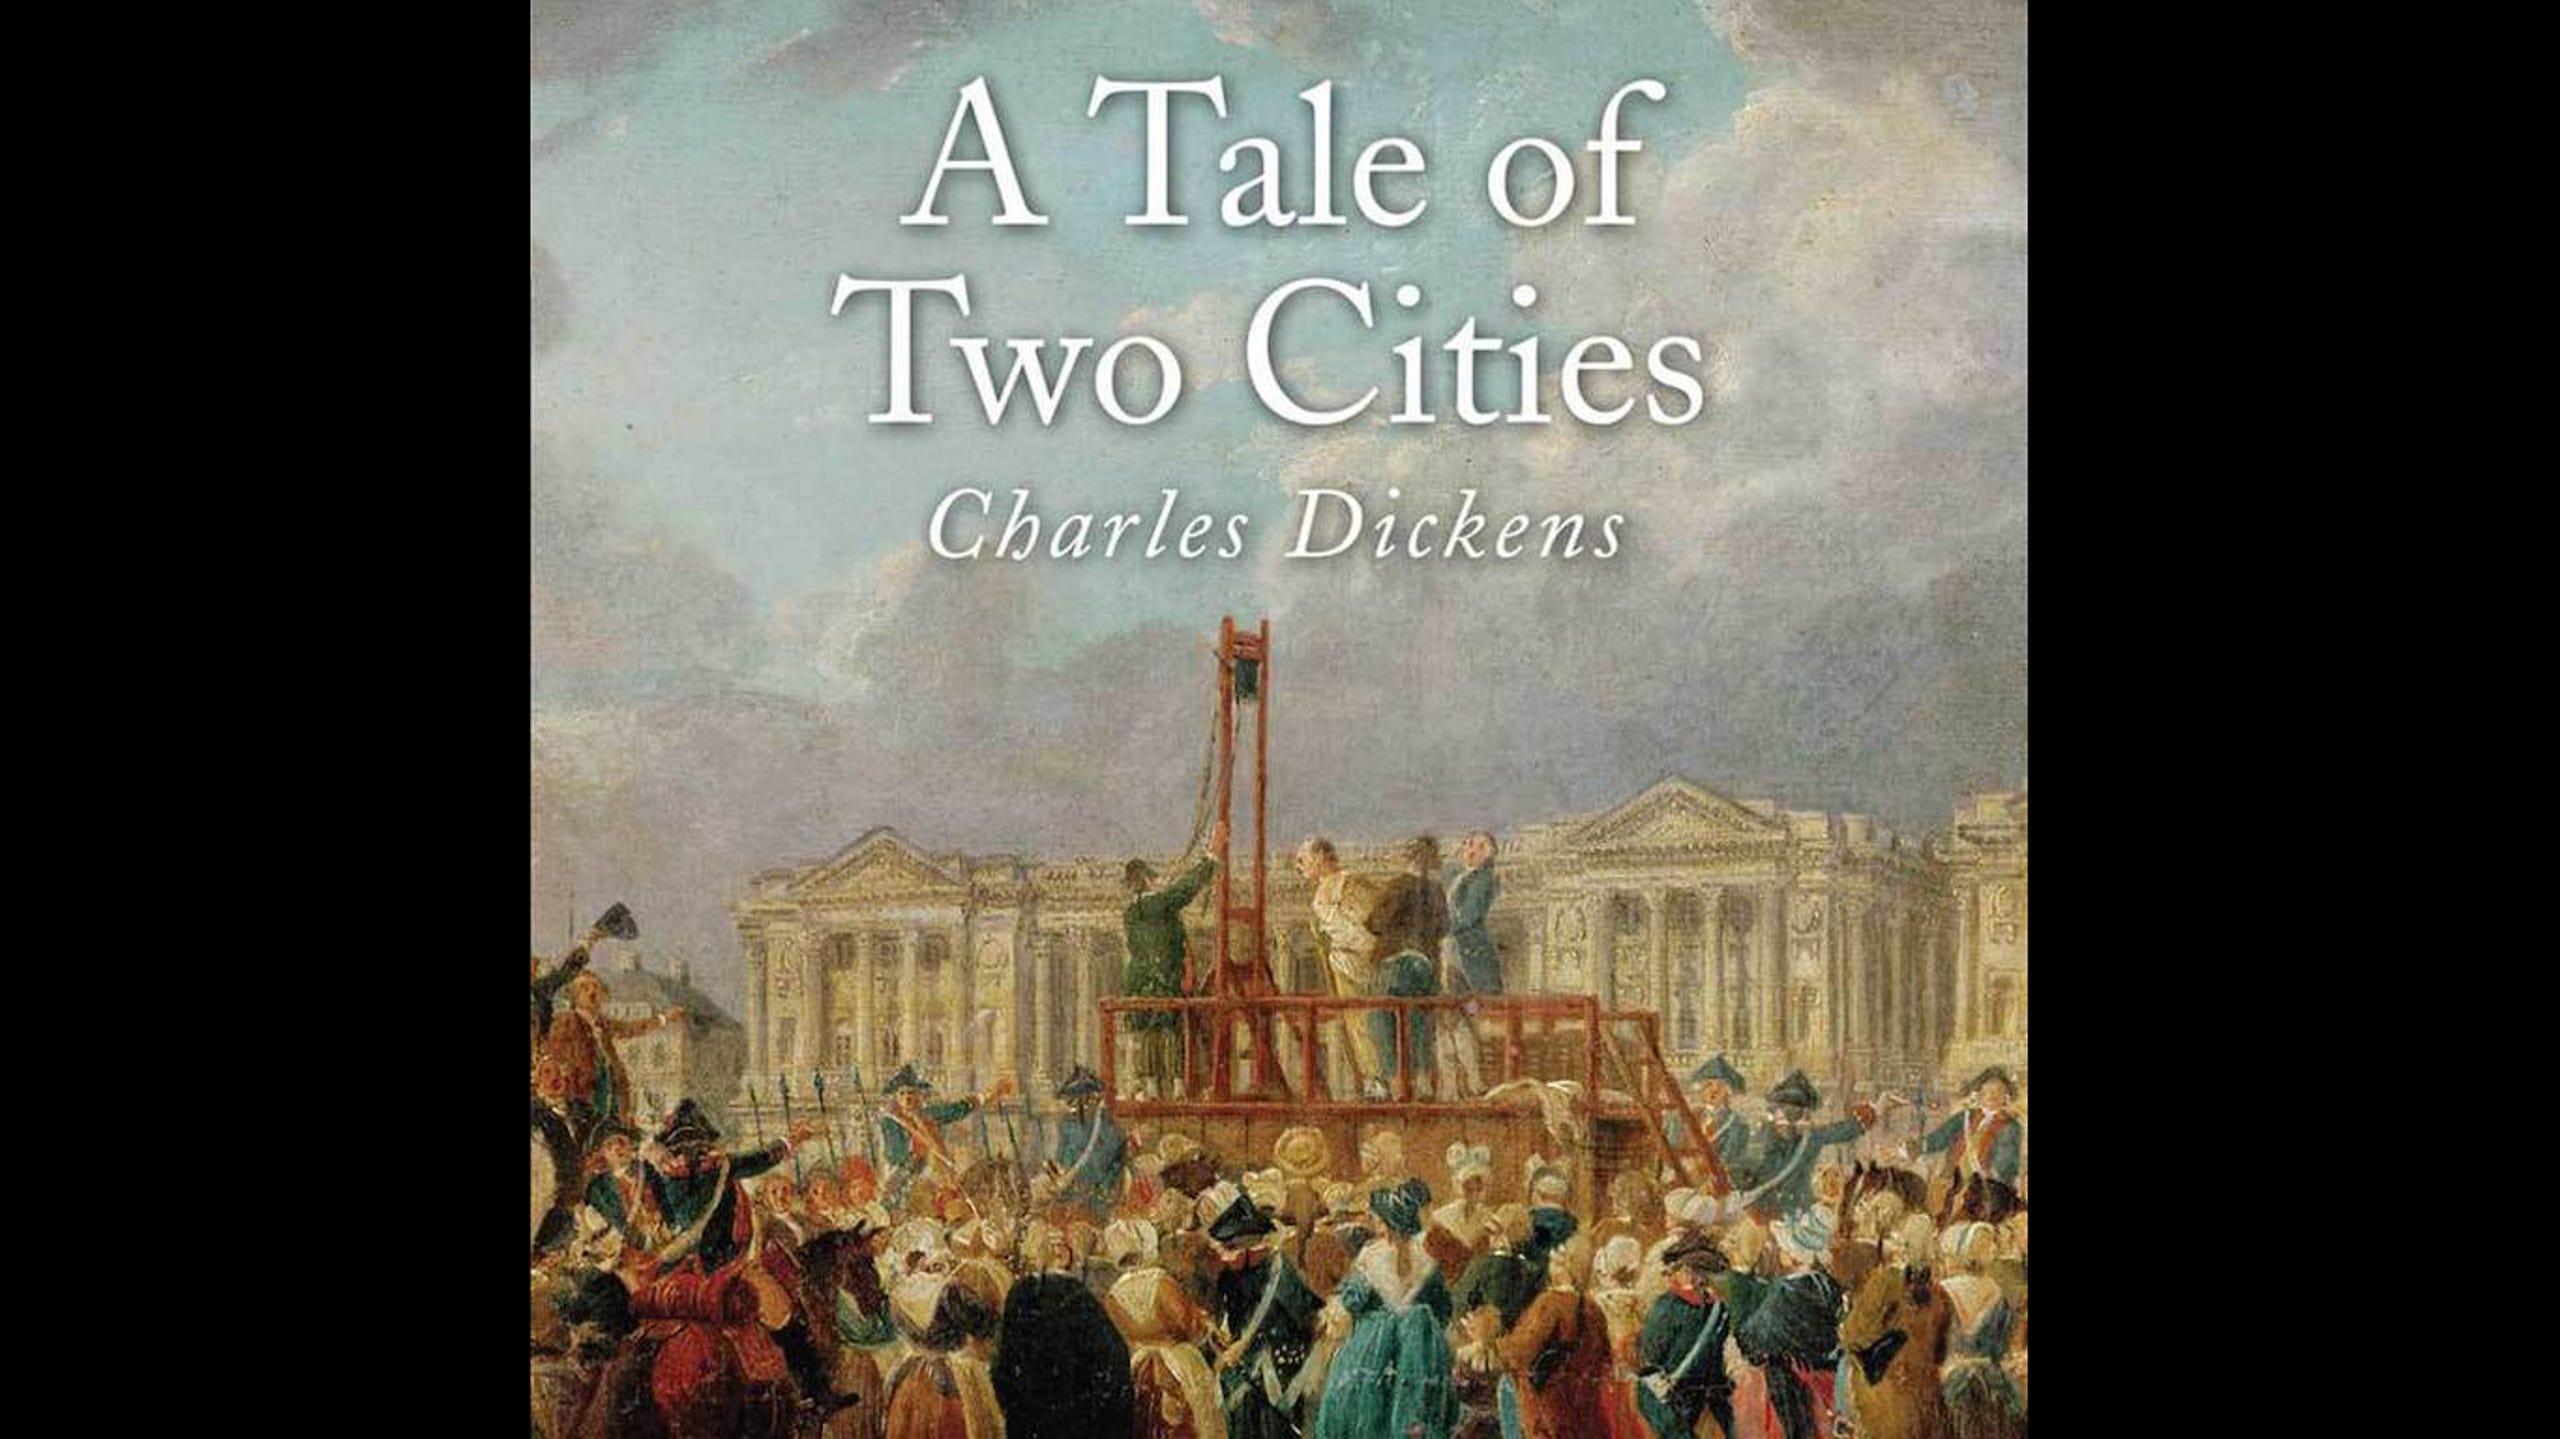 <strong>3. A Tale of Two Cities </strong><strong>• Author:</strong> Charles Dickens <strong>• Originally published in:</strong> 1859 <strong>• </strong>"A Tale of Two Cities" is a novel that spans London and revolutionary Paris and shows how personal events can be driven by political drama. It is on almost every literary classics list, whatever the definition of a "classic" is. "I read 'A Tale of Two Cities' on summer vacation this year and was blown away," Buster said. "I realized that I'd originally encountered [it] when I was too young to appreciate it." The definition of a classic, he notes, is perhaps just that: a book you can re-read every other year or so and get something new out of it.